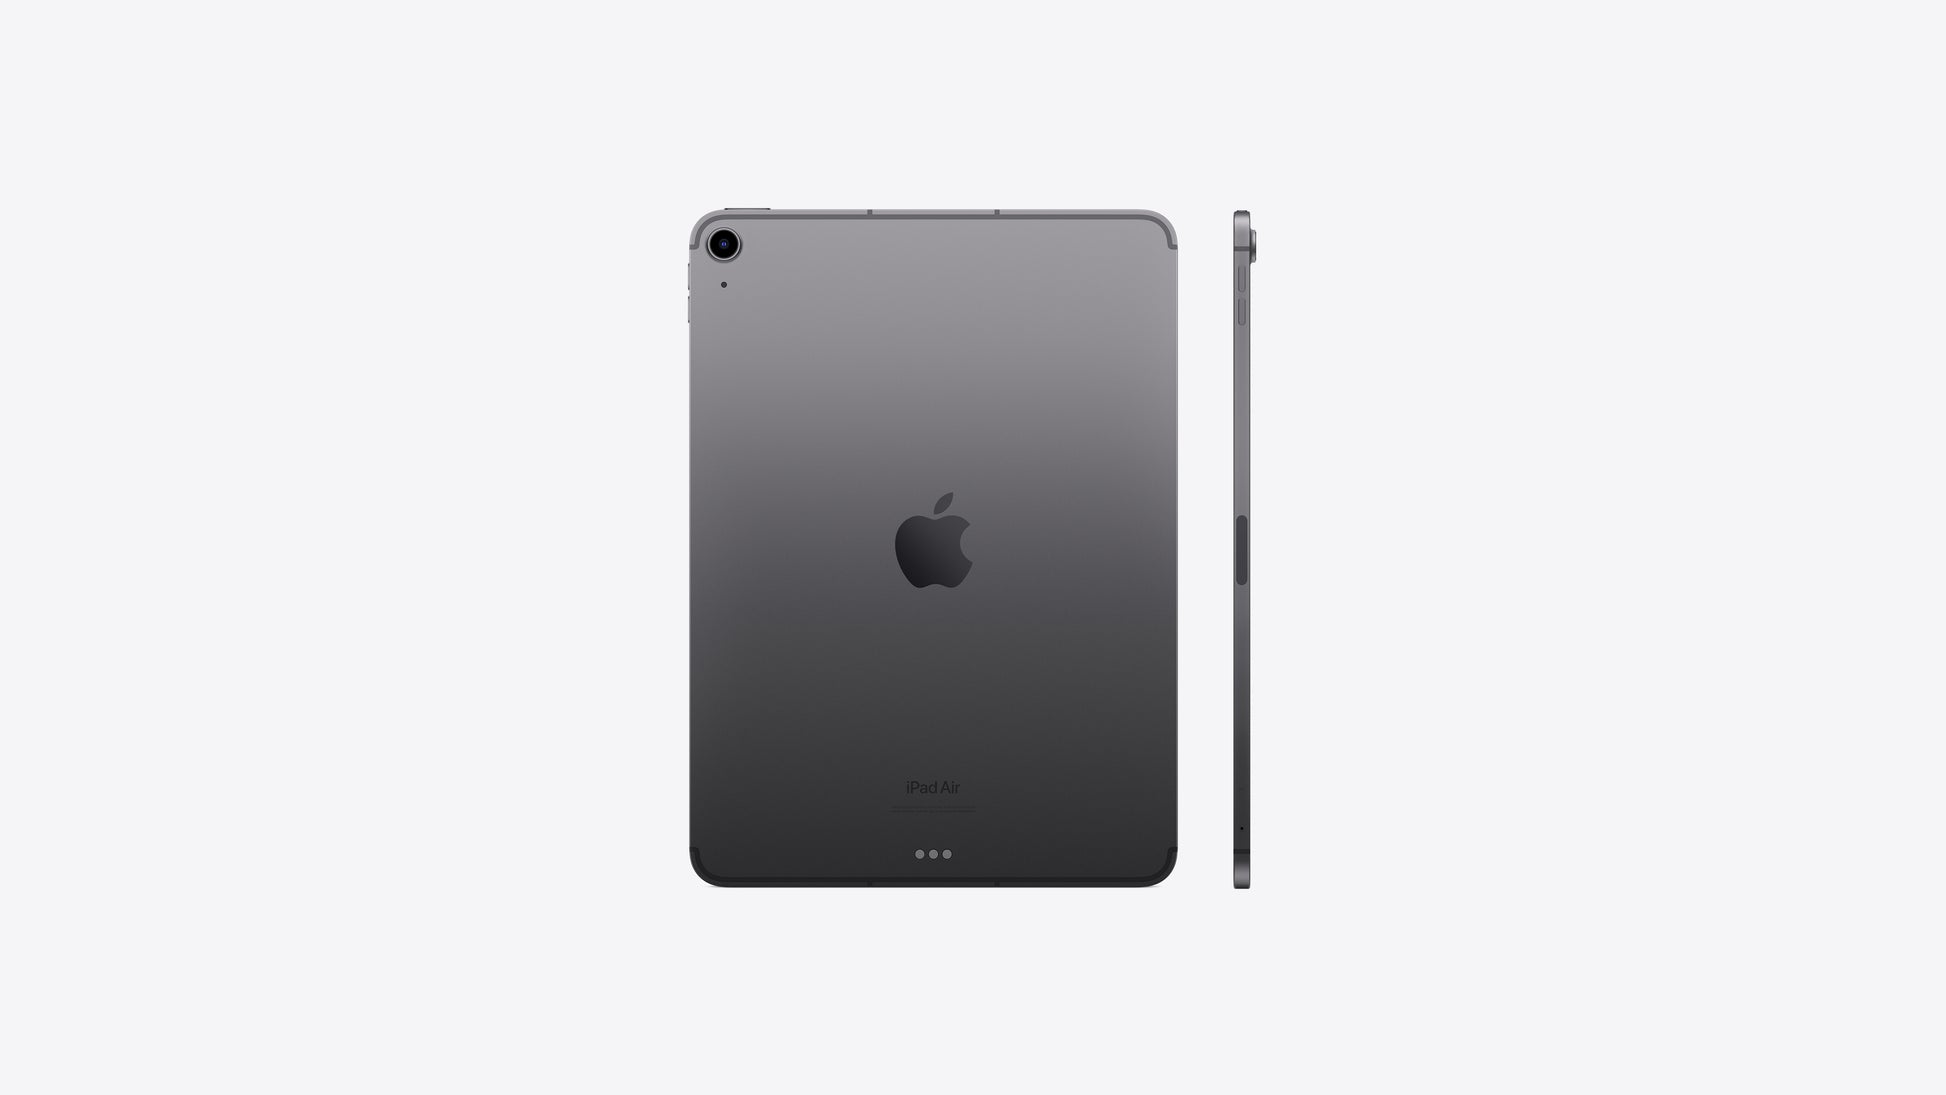 iPad Air, Color - Space Gray, 256GB, Wi-Fi + Cellular, in the Box - iPad Air, USB-C Charge Cable and 20W USB-C Power Adapter. Guarantee for 2 years. + Apple pencil